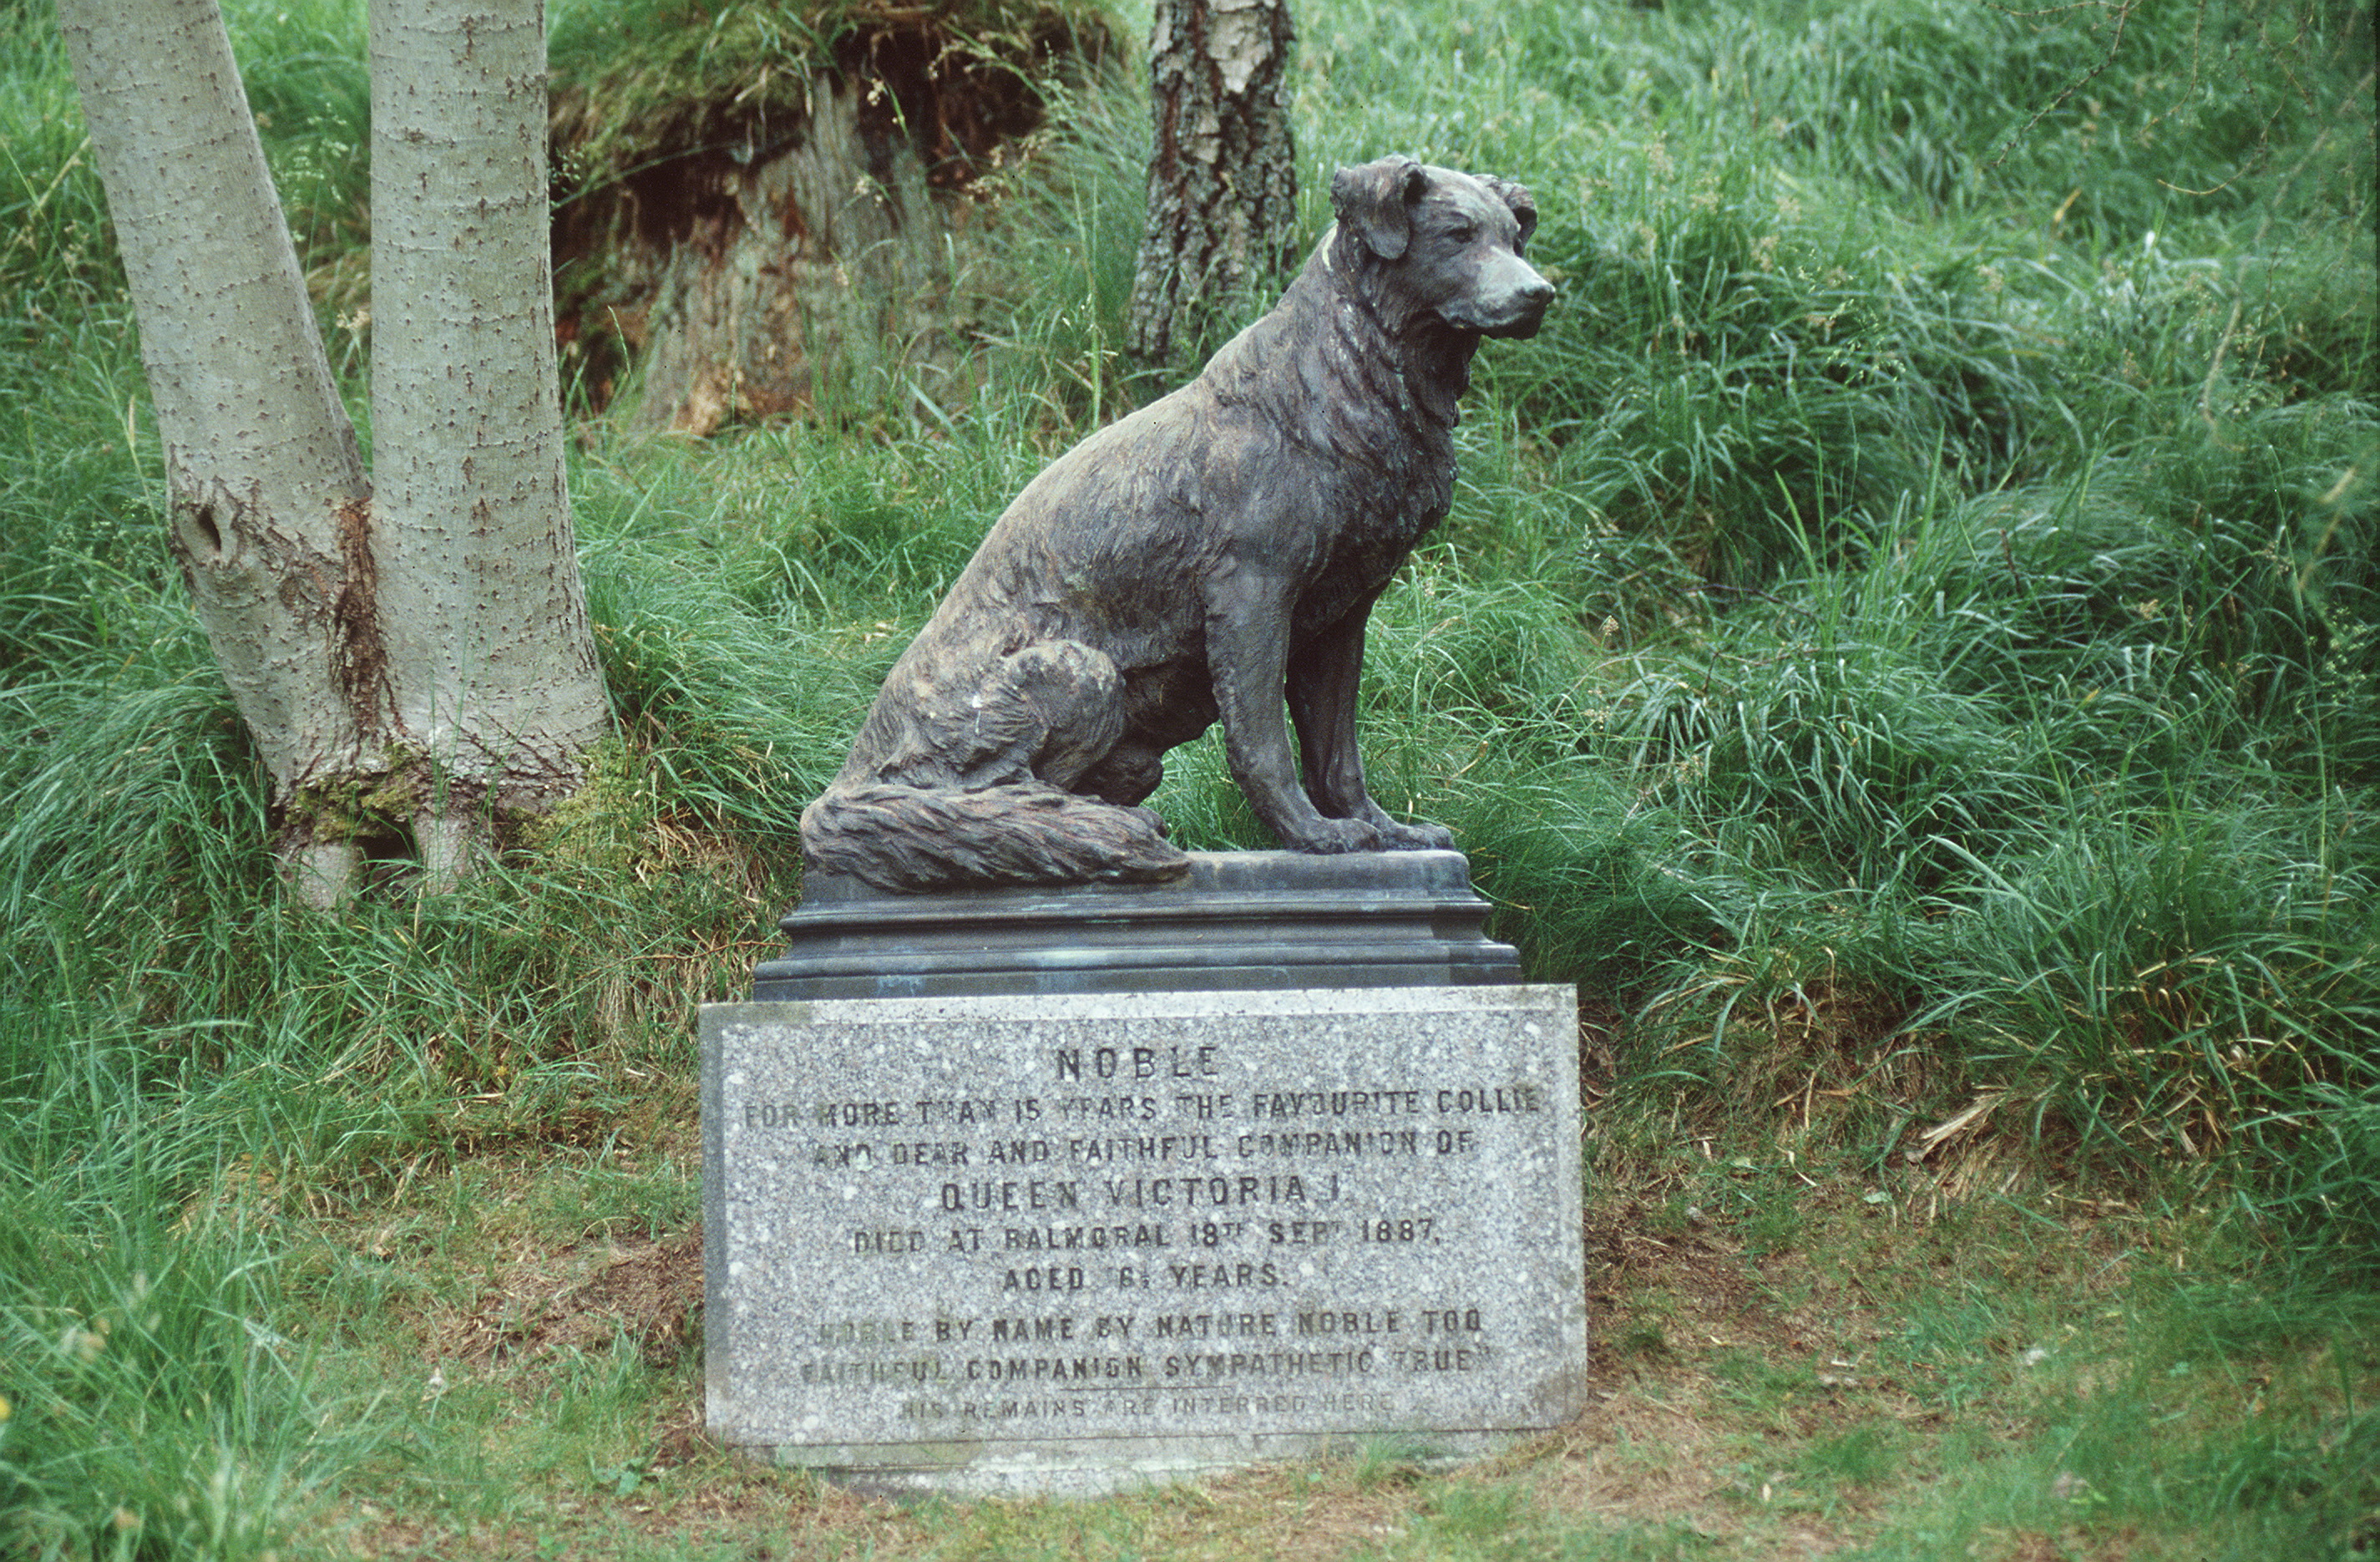 A statue of Queen Victoria's dog, Noble | Source: Getty Images